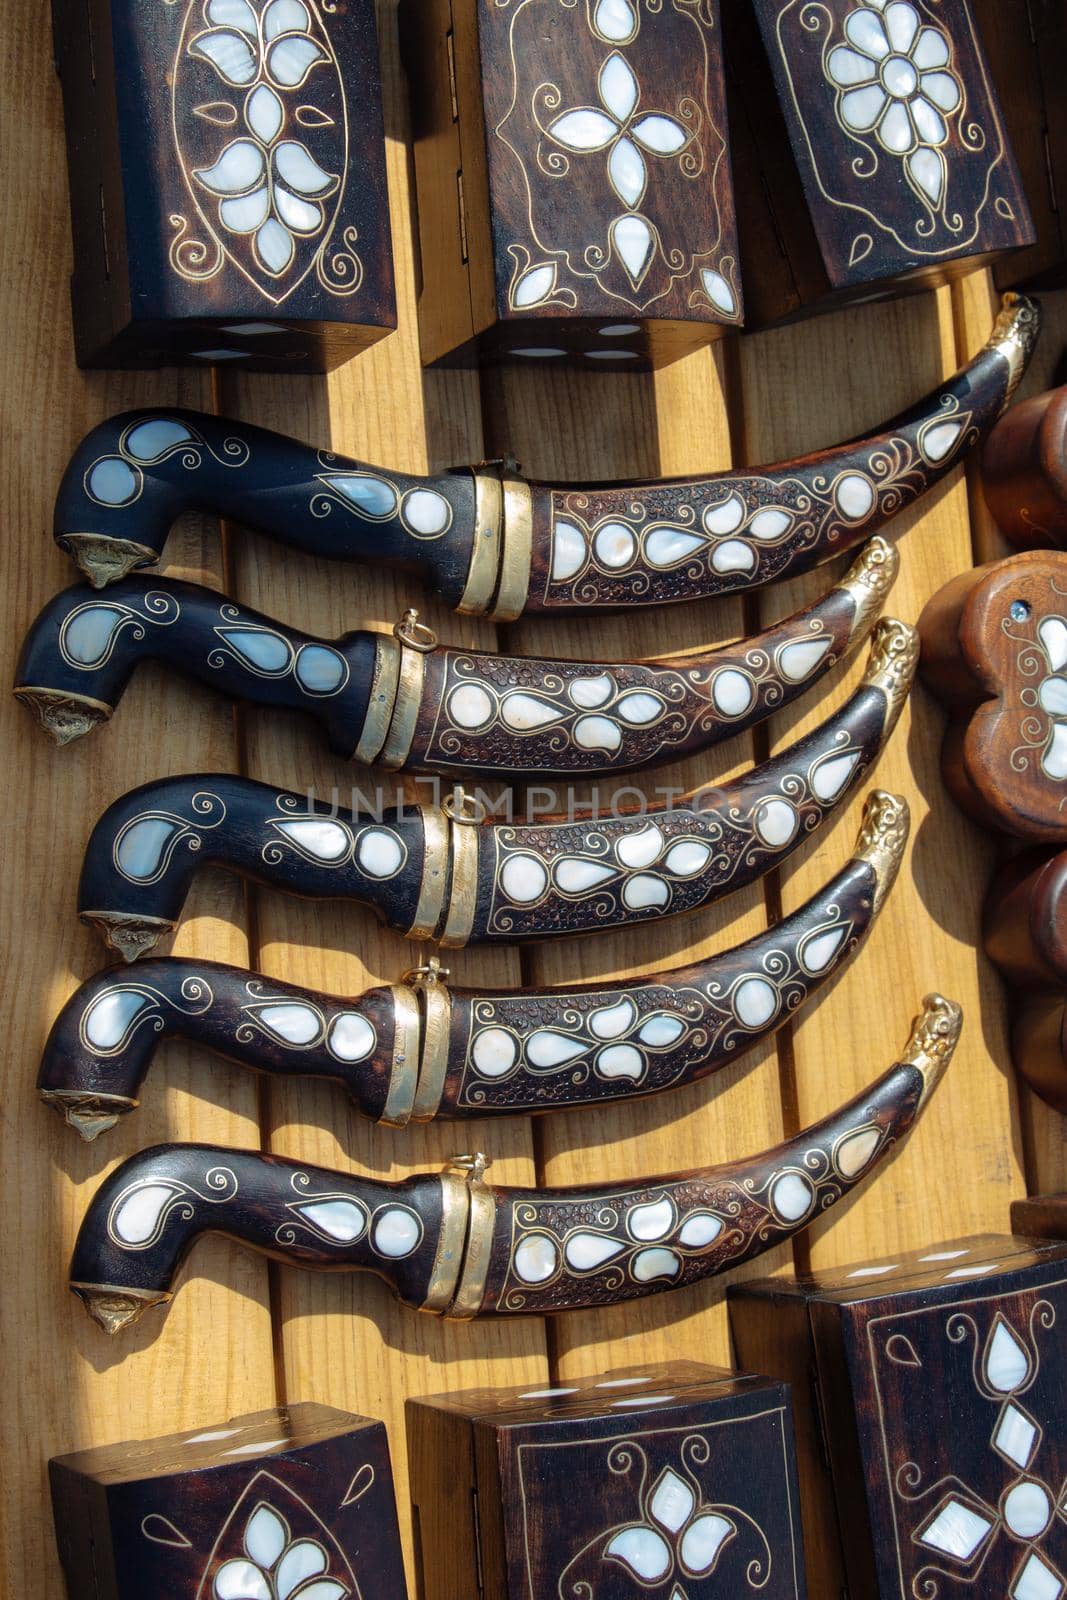 Turkish style daggers with mother of pearl inlays by berkay